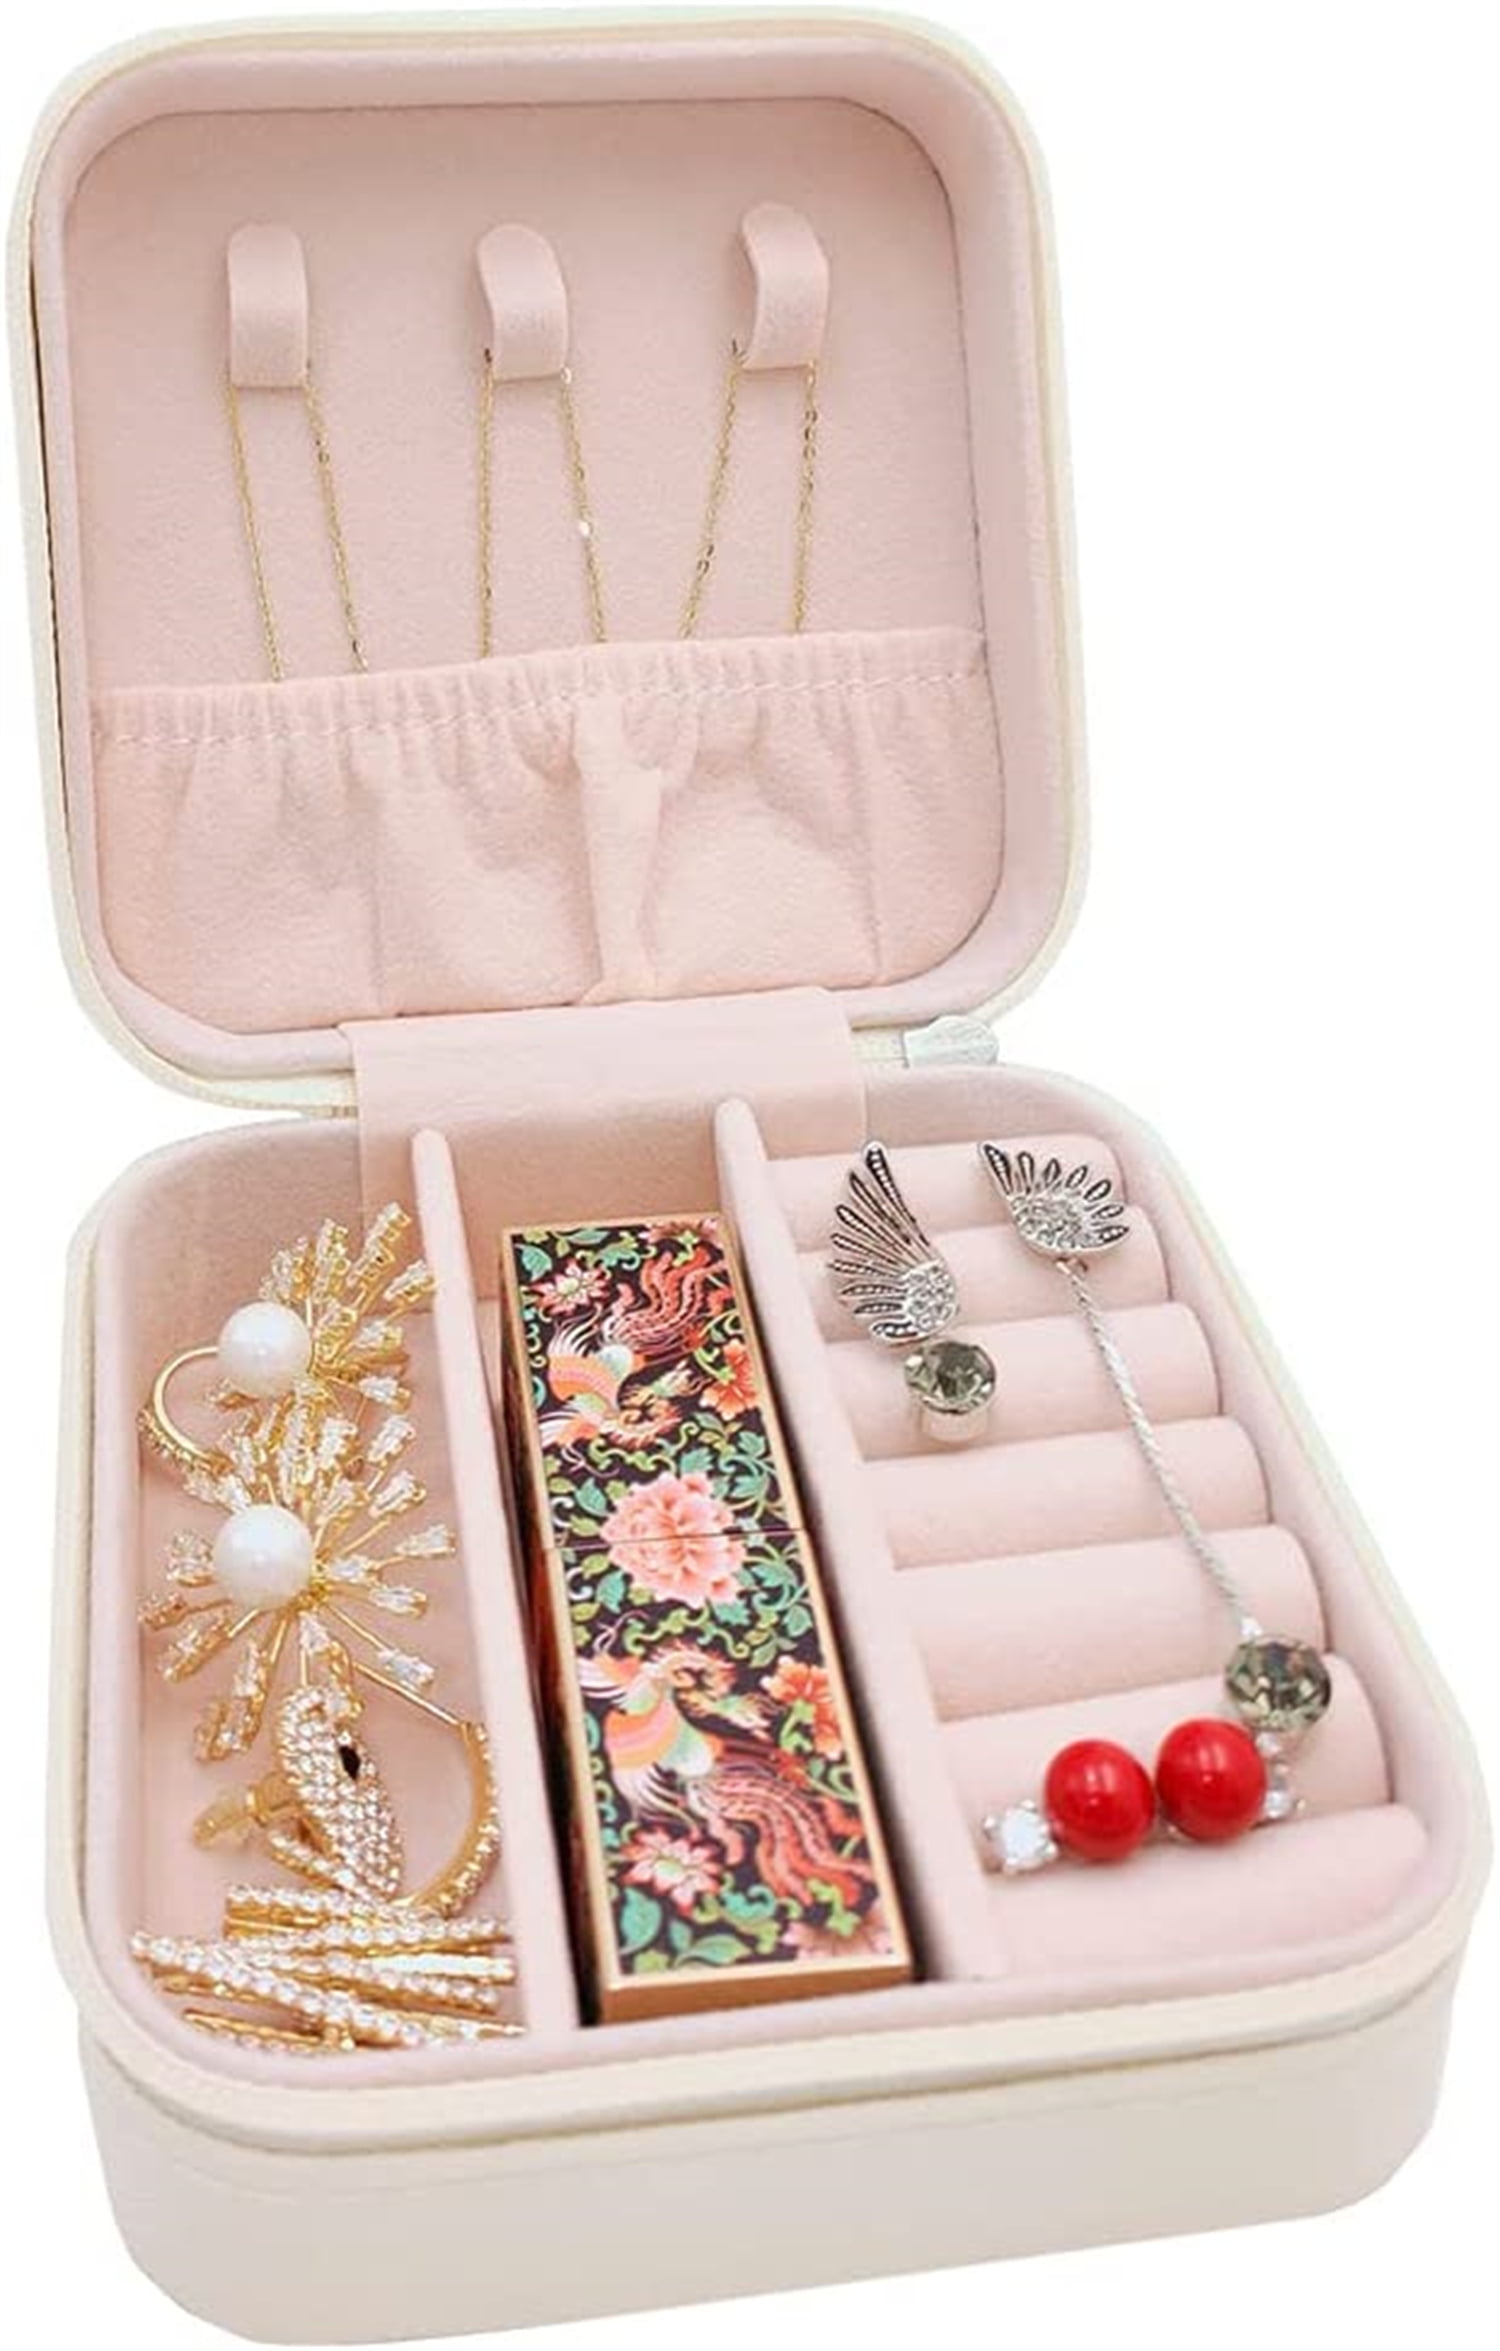 Doolland Kids Jewelry Box, PU Leather Made Jewelry Case Little Girls Jewelry Set, 2/3/4Layers Portable Travel Jewelry Case for Earrings Bracelets Rings Hair